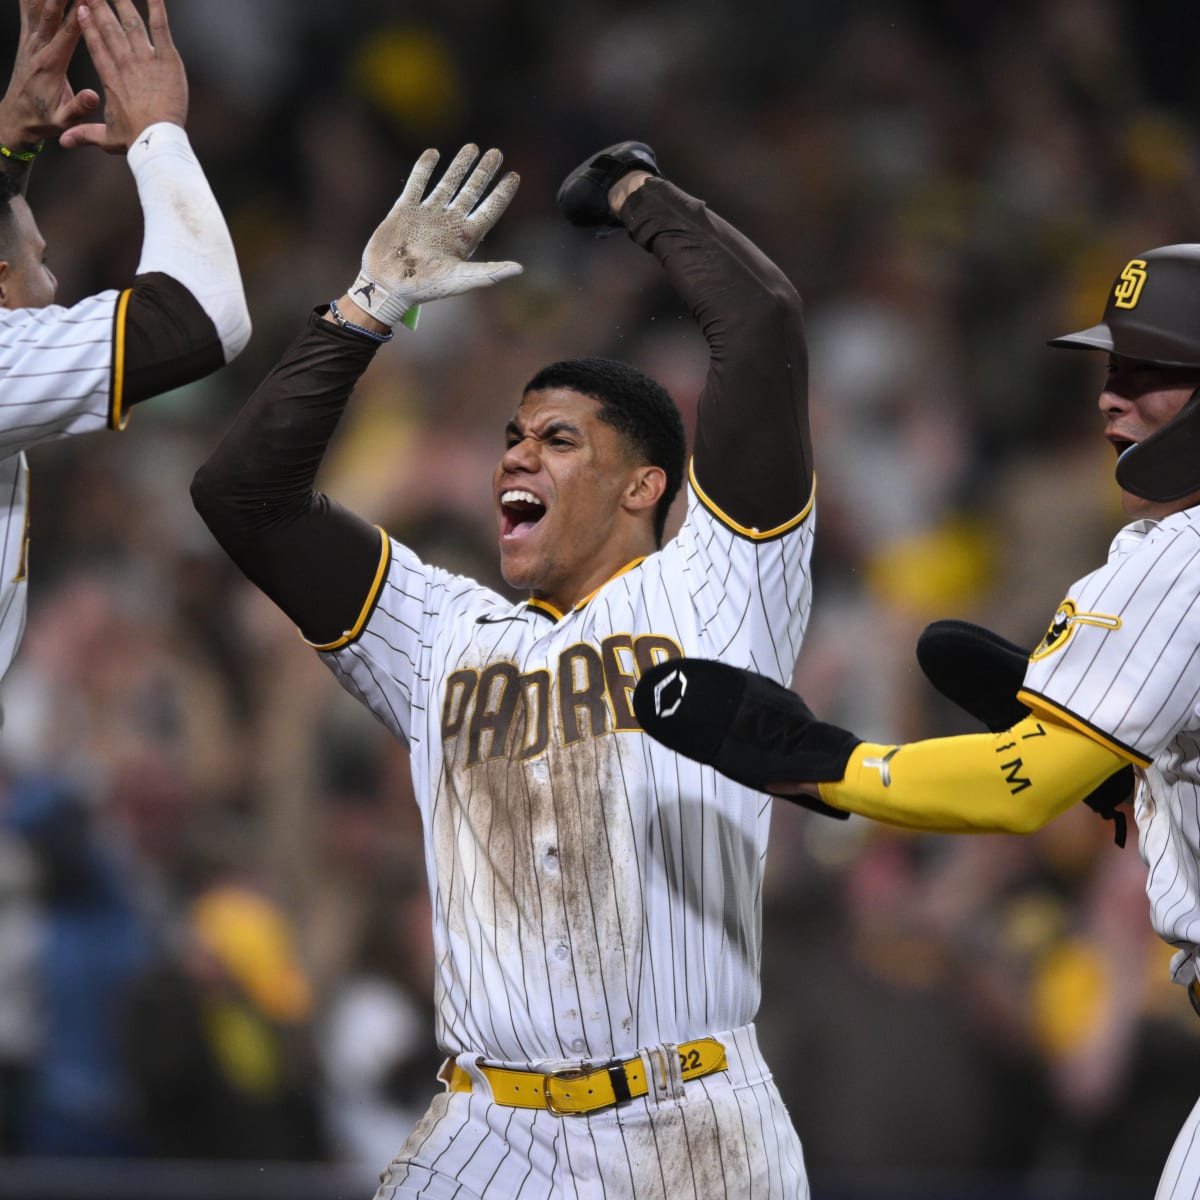 MLB to air San Diego Padres games after Diamond Sports stops payments